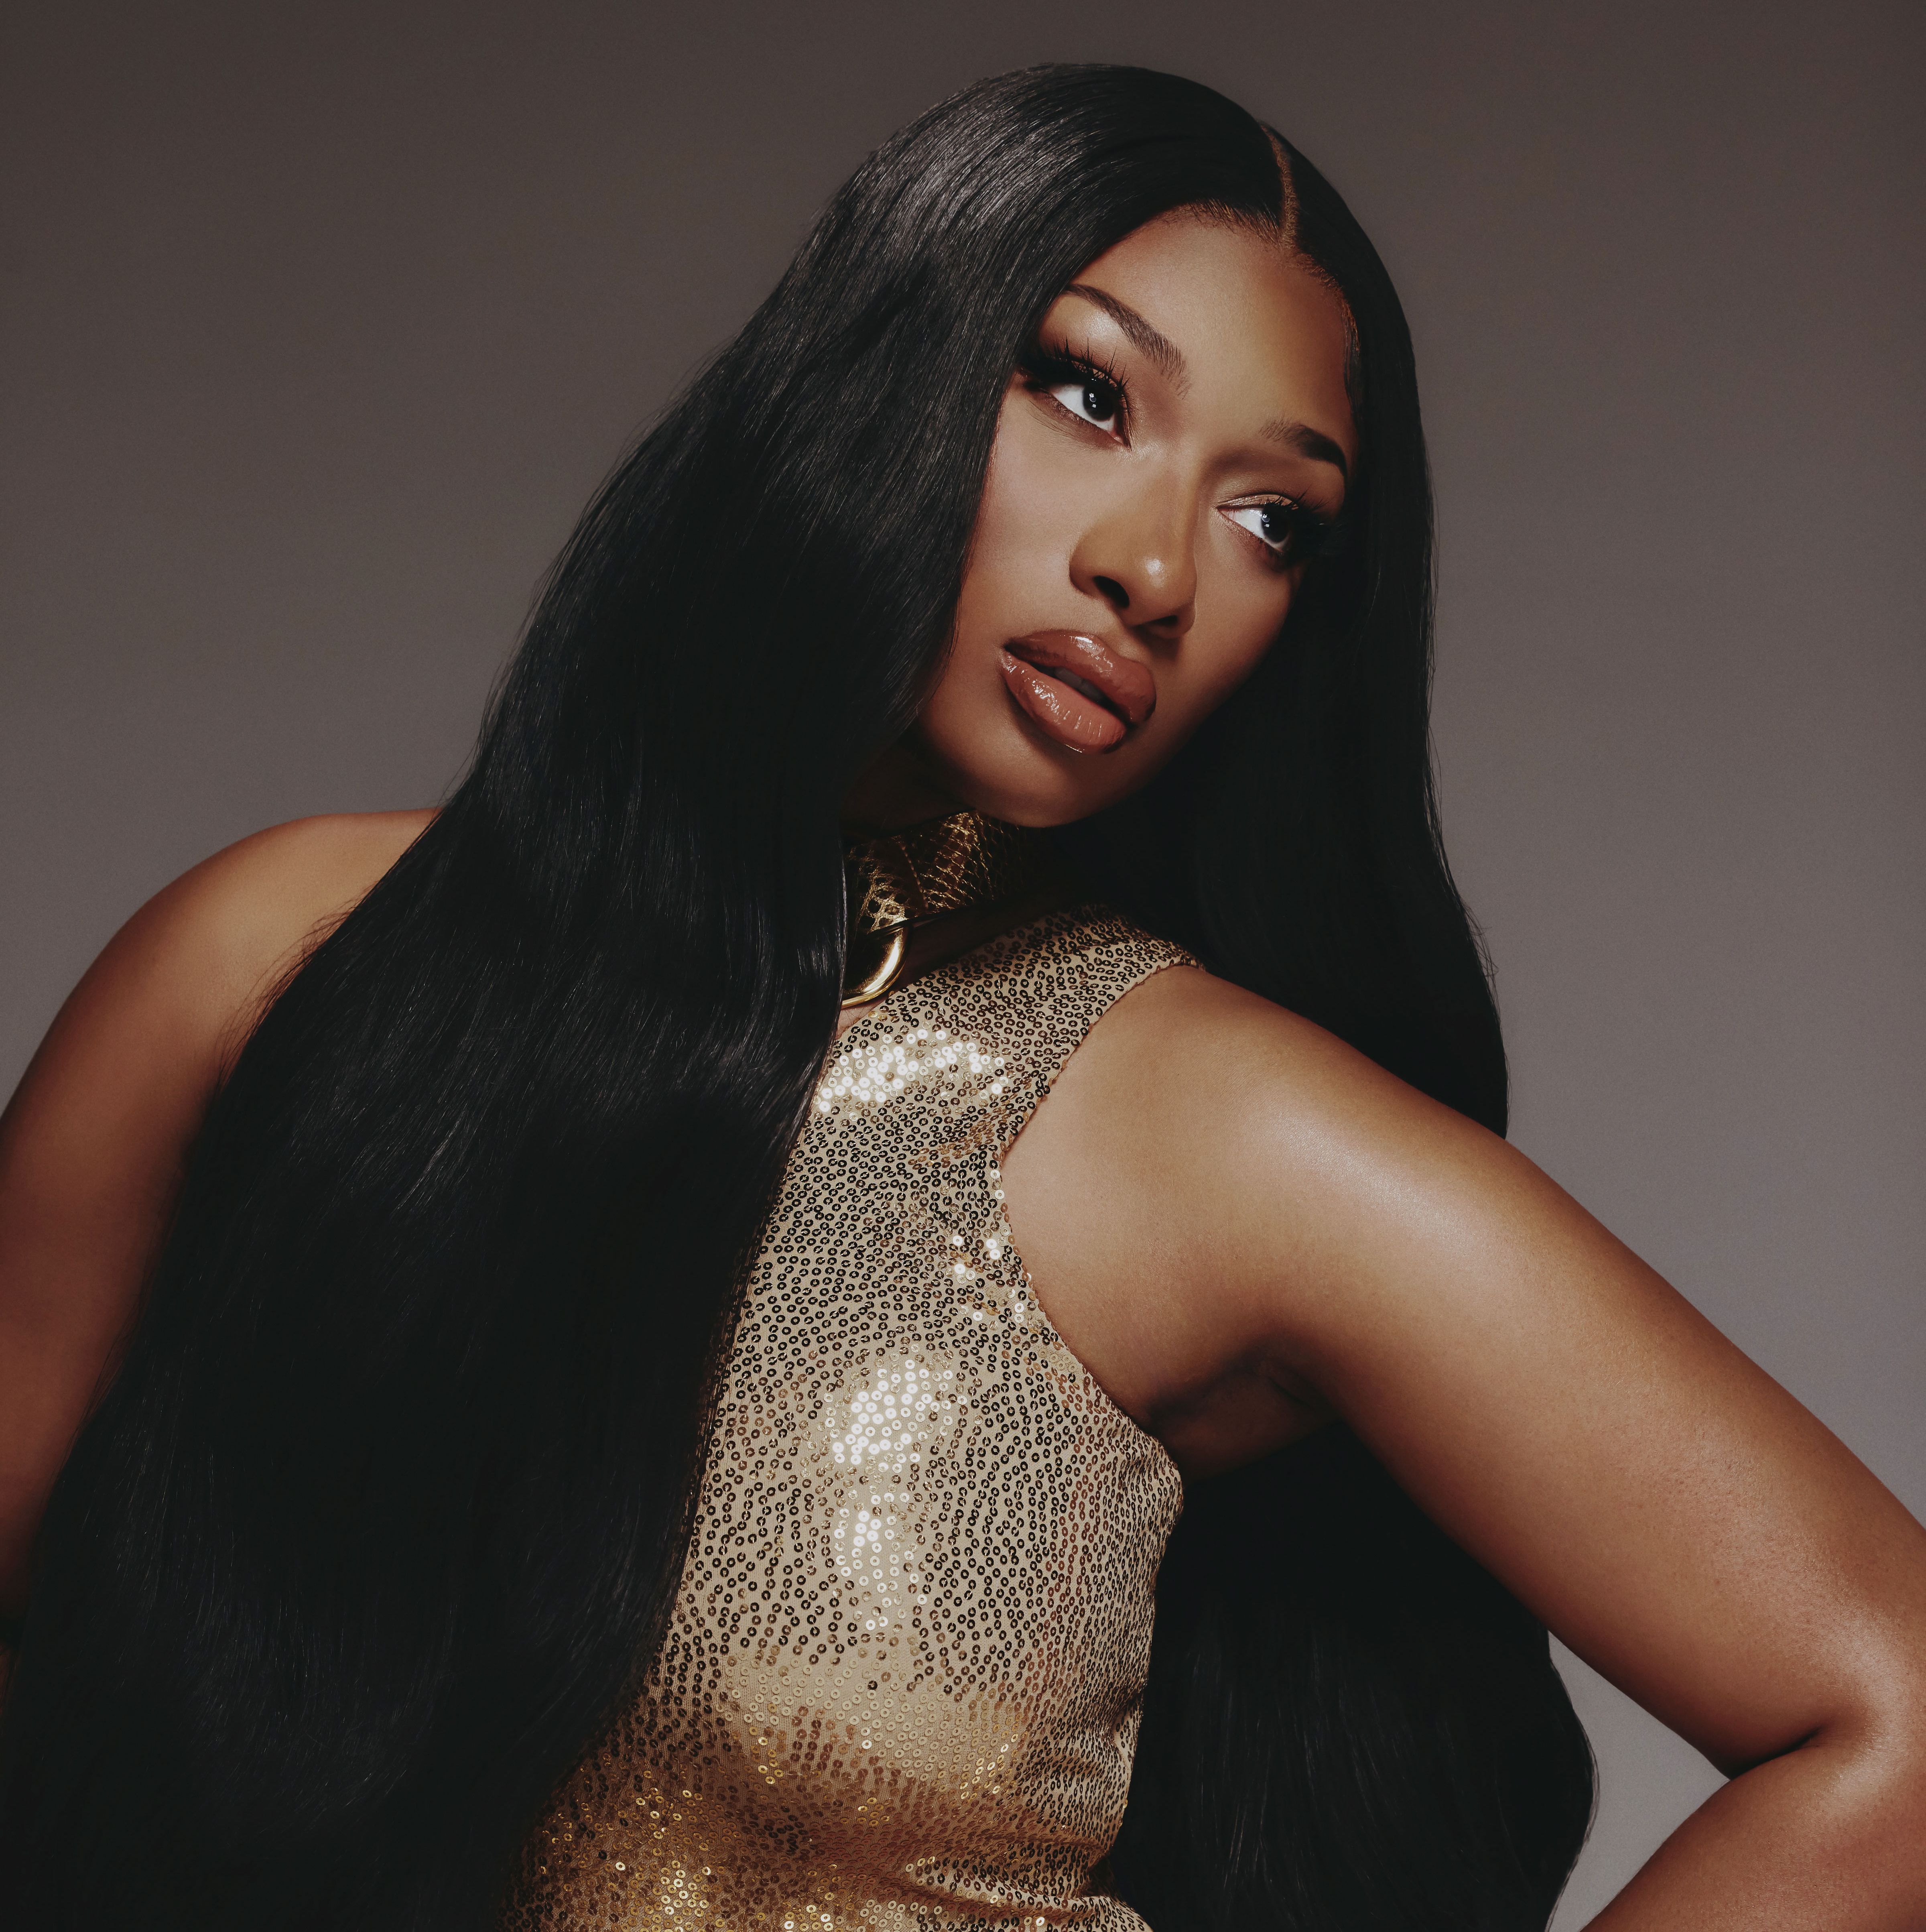 Megan Thee Stallion Breaks Silence on Tory Lanez Trial: 'I'm More Than Just My Trauma'